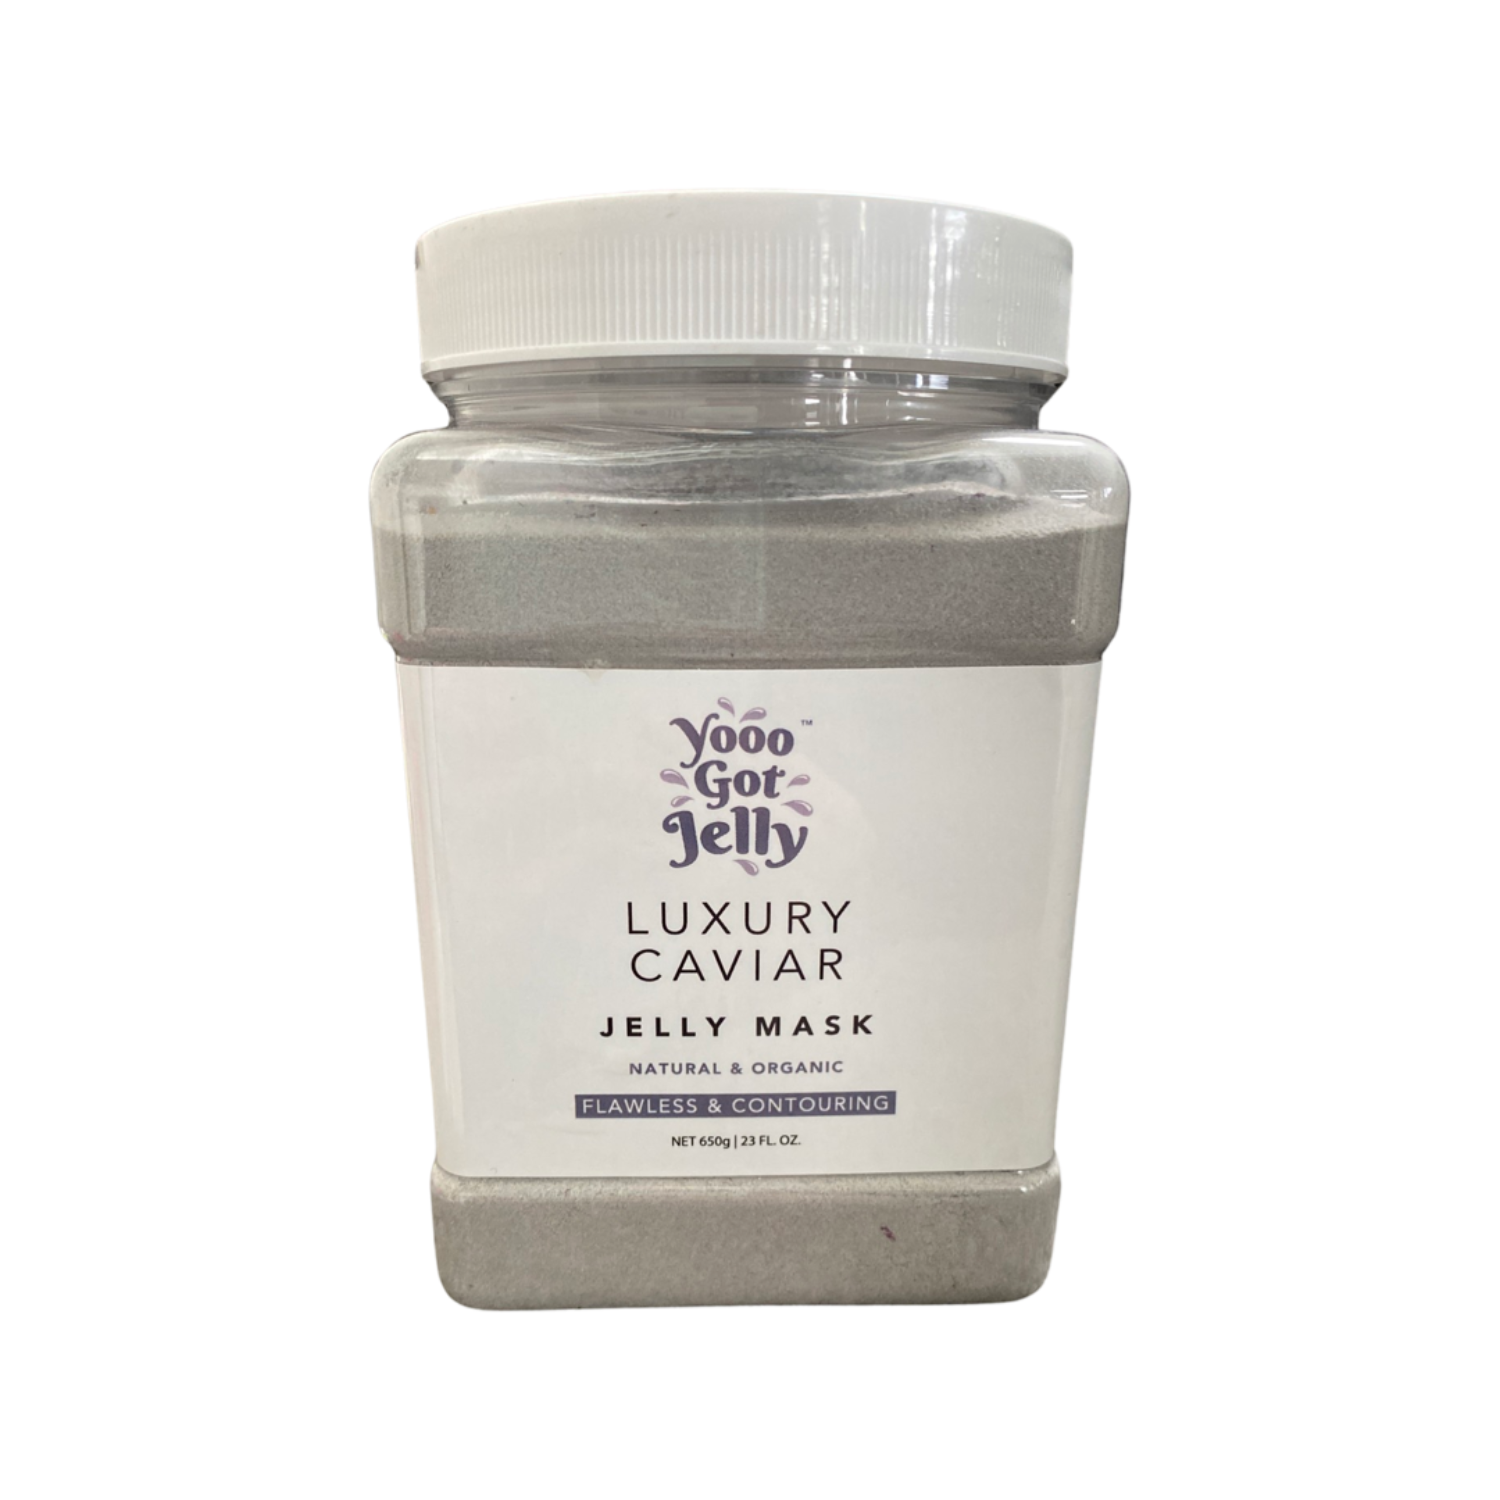 LUXURY CAVIAR JELLY MASK - Flawless and Contouring